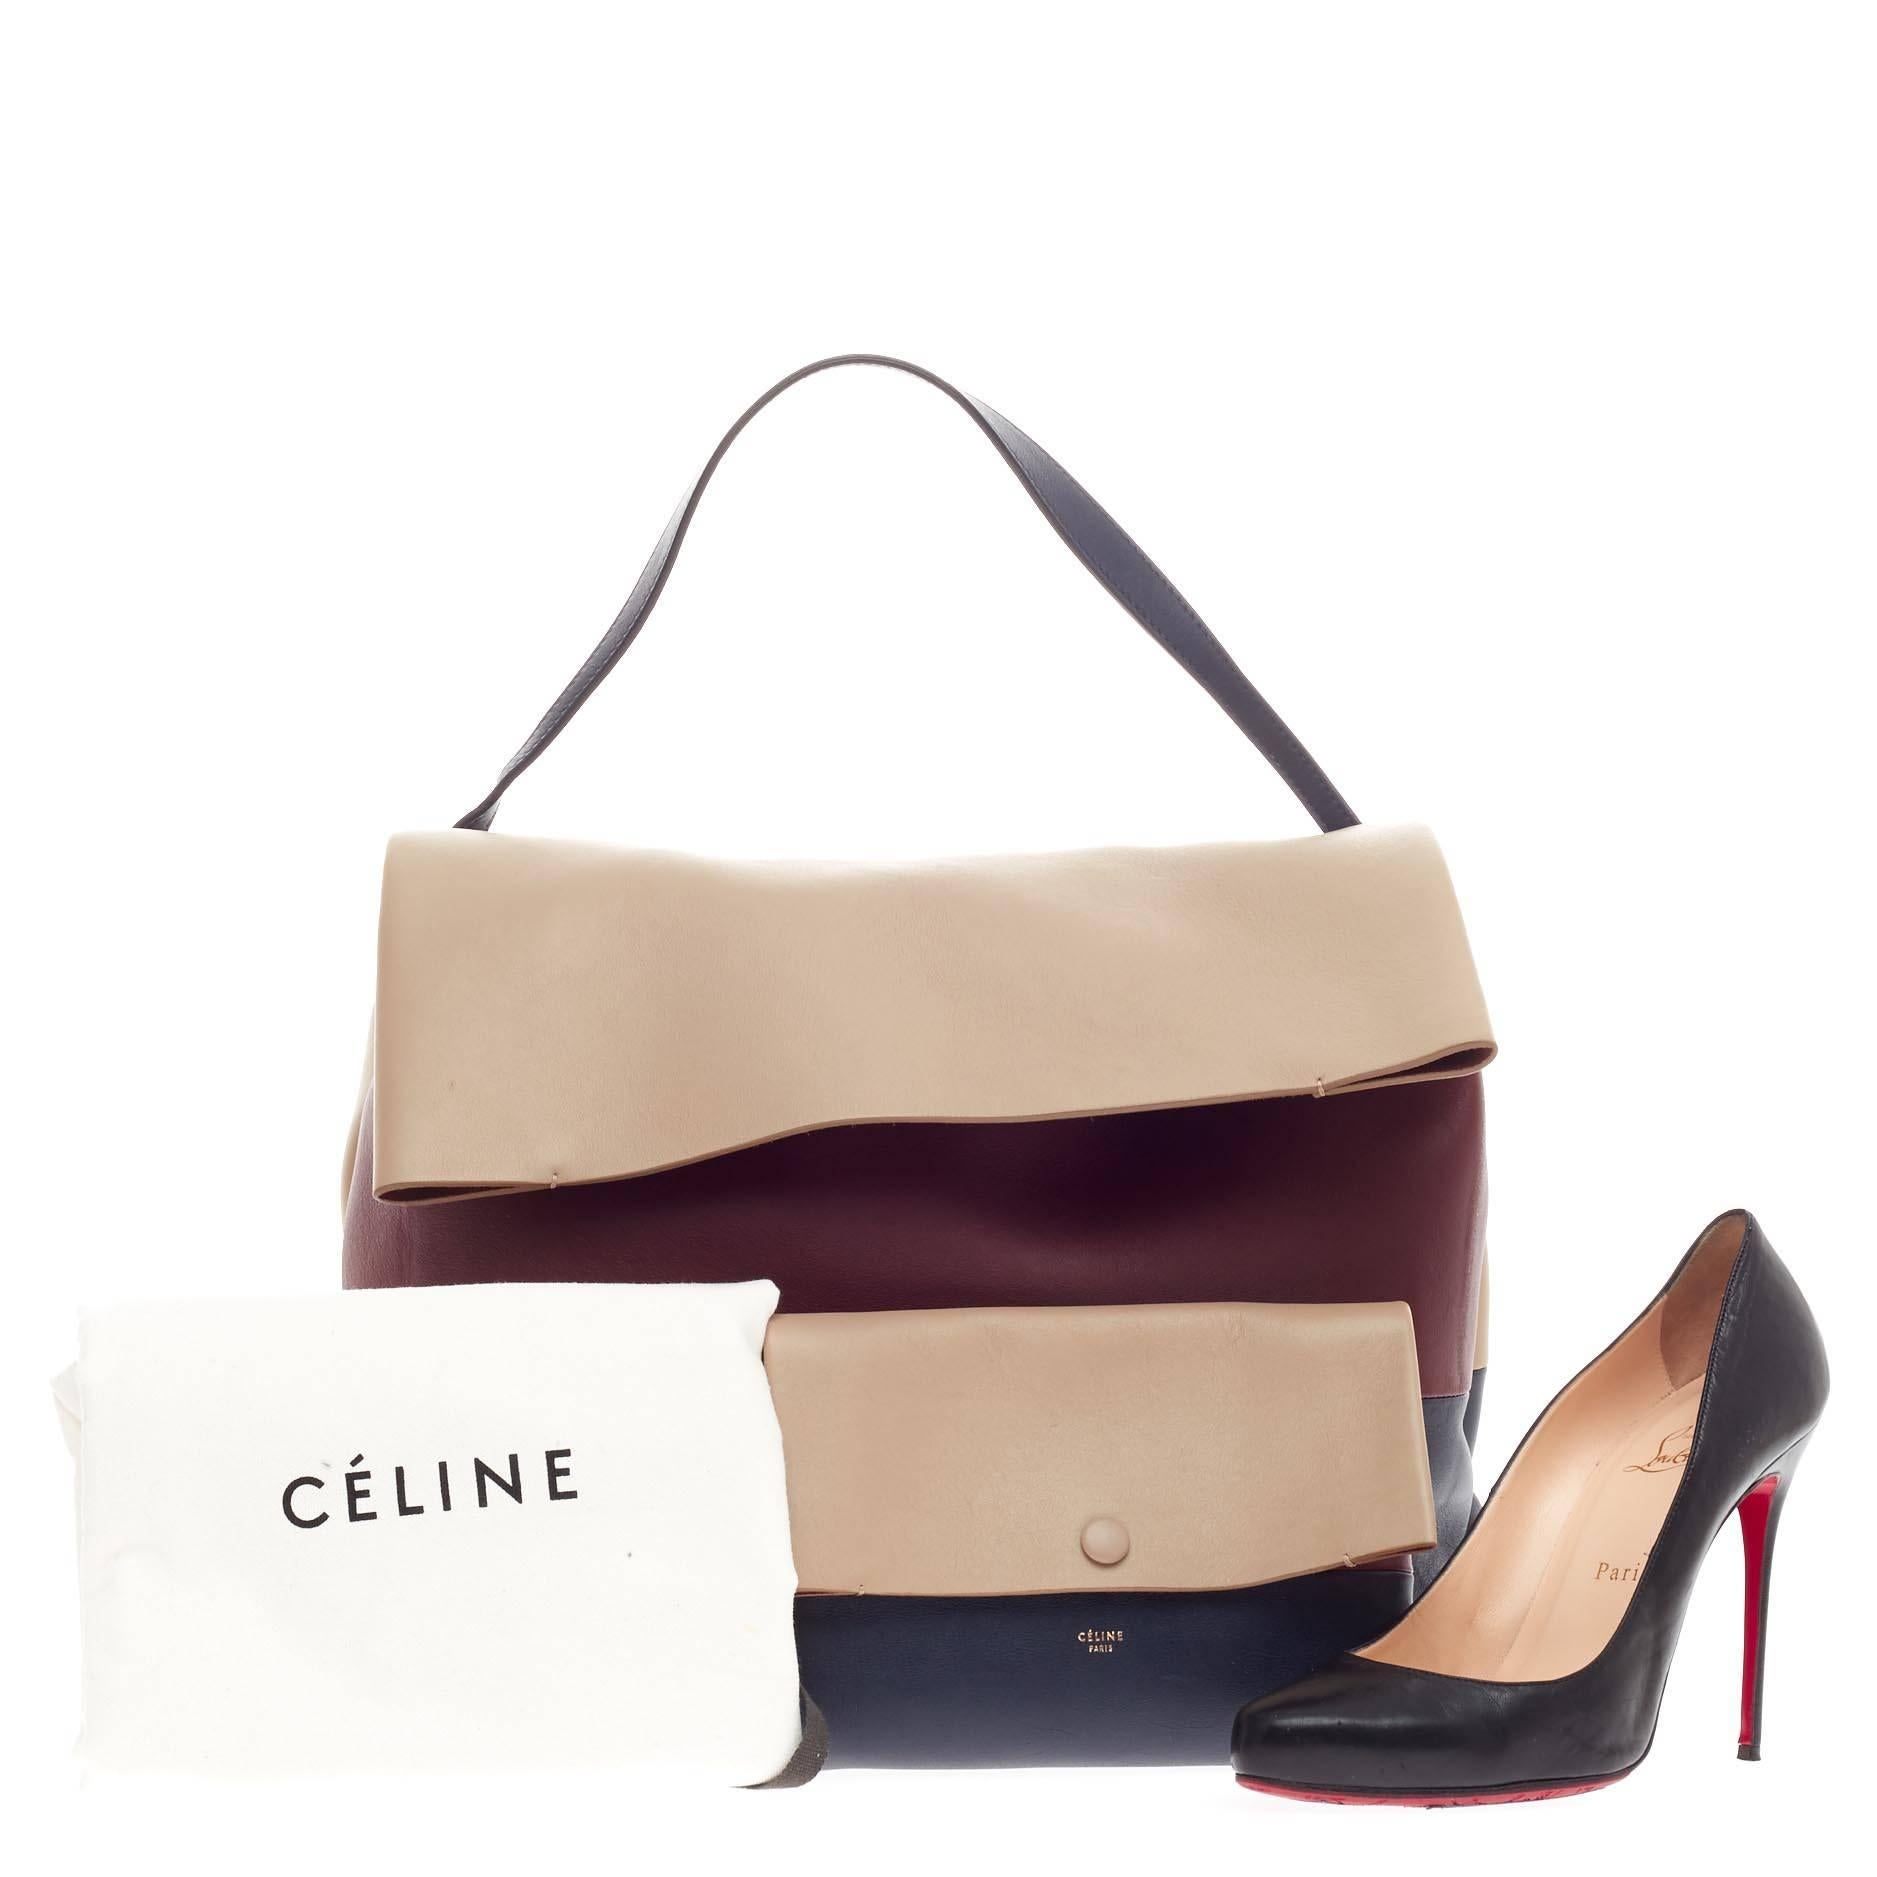 This authentic Celine All Soft Tote Leather is a neutral and understated look perfect for the modern woman. Crafted in triad neutral shades of navy blue, maroon and cream leather, this minimalist tote features a single loop leather shoulder strap,